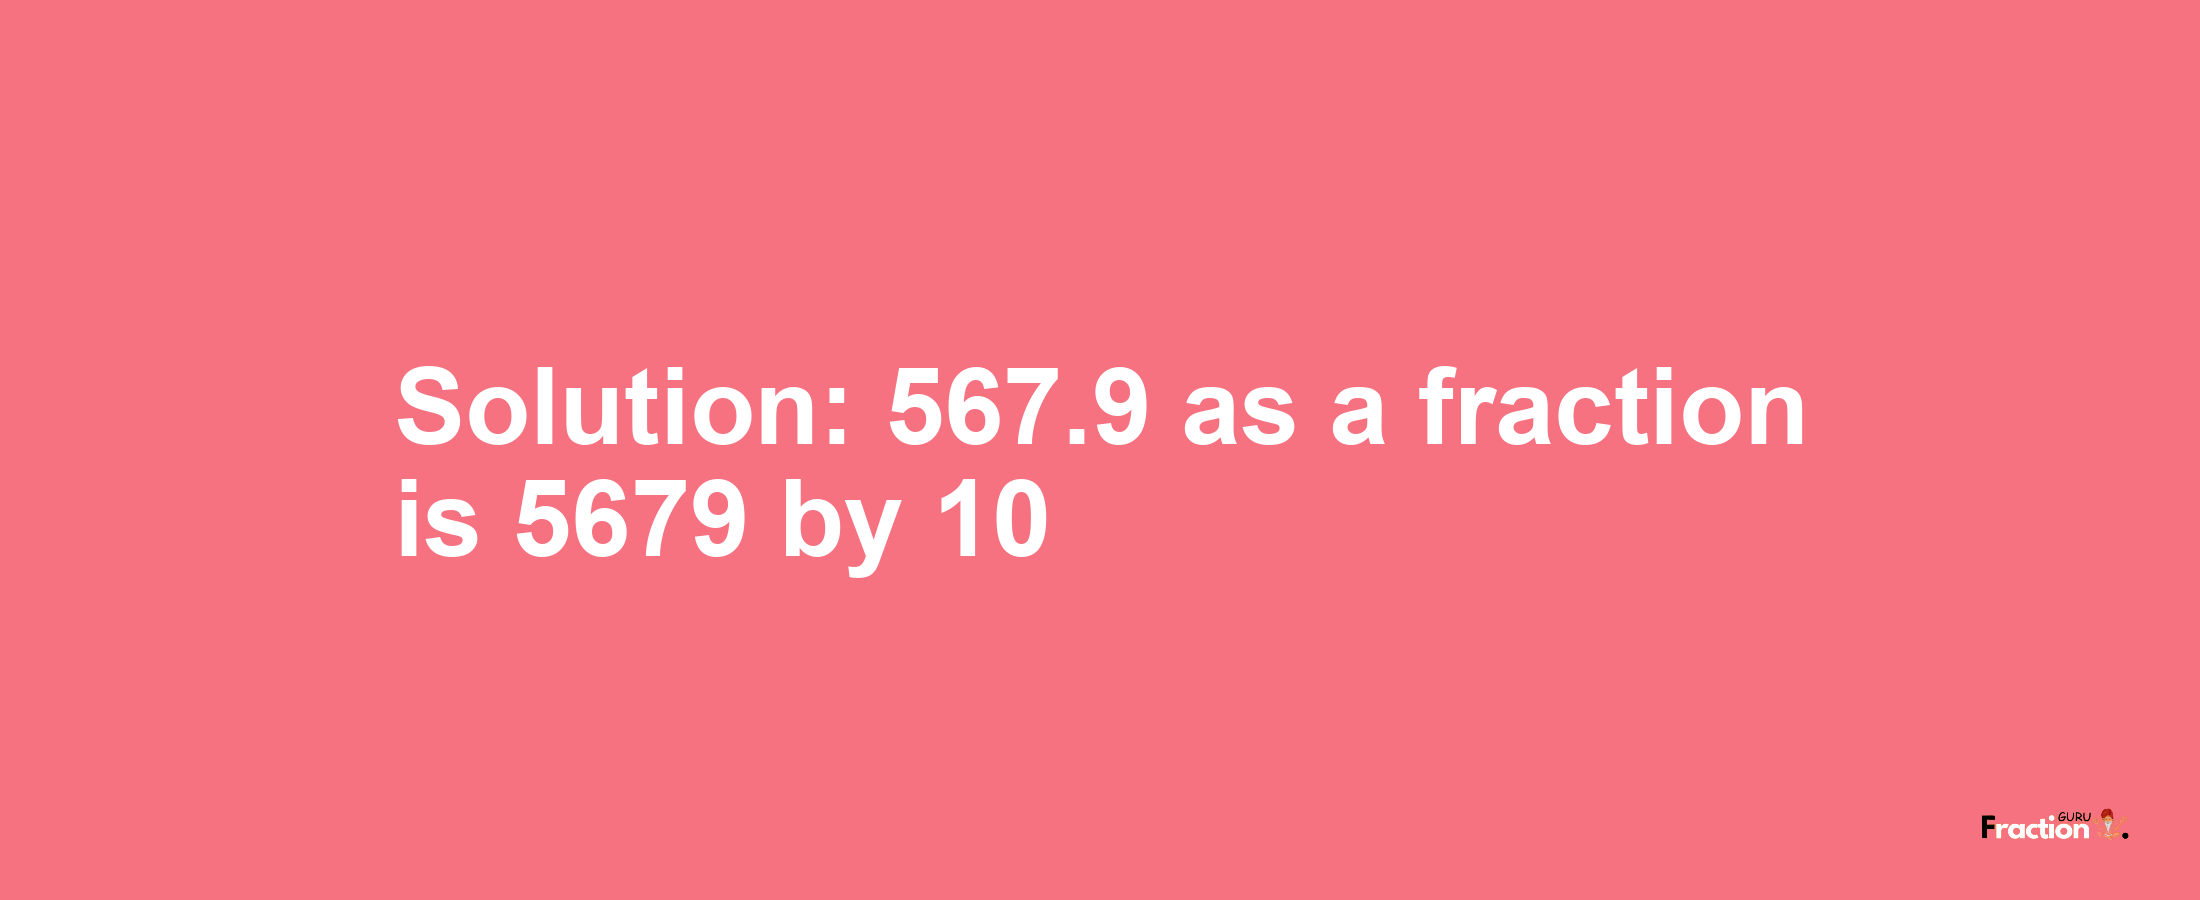 Solution:567.9 as a fraction is 5679/10